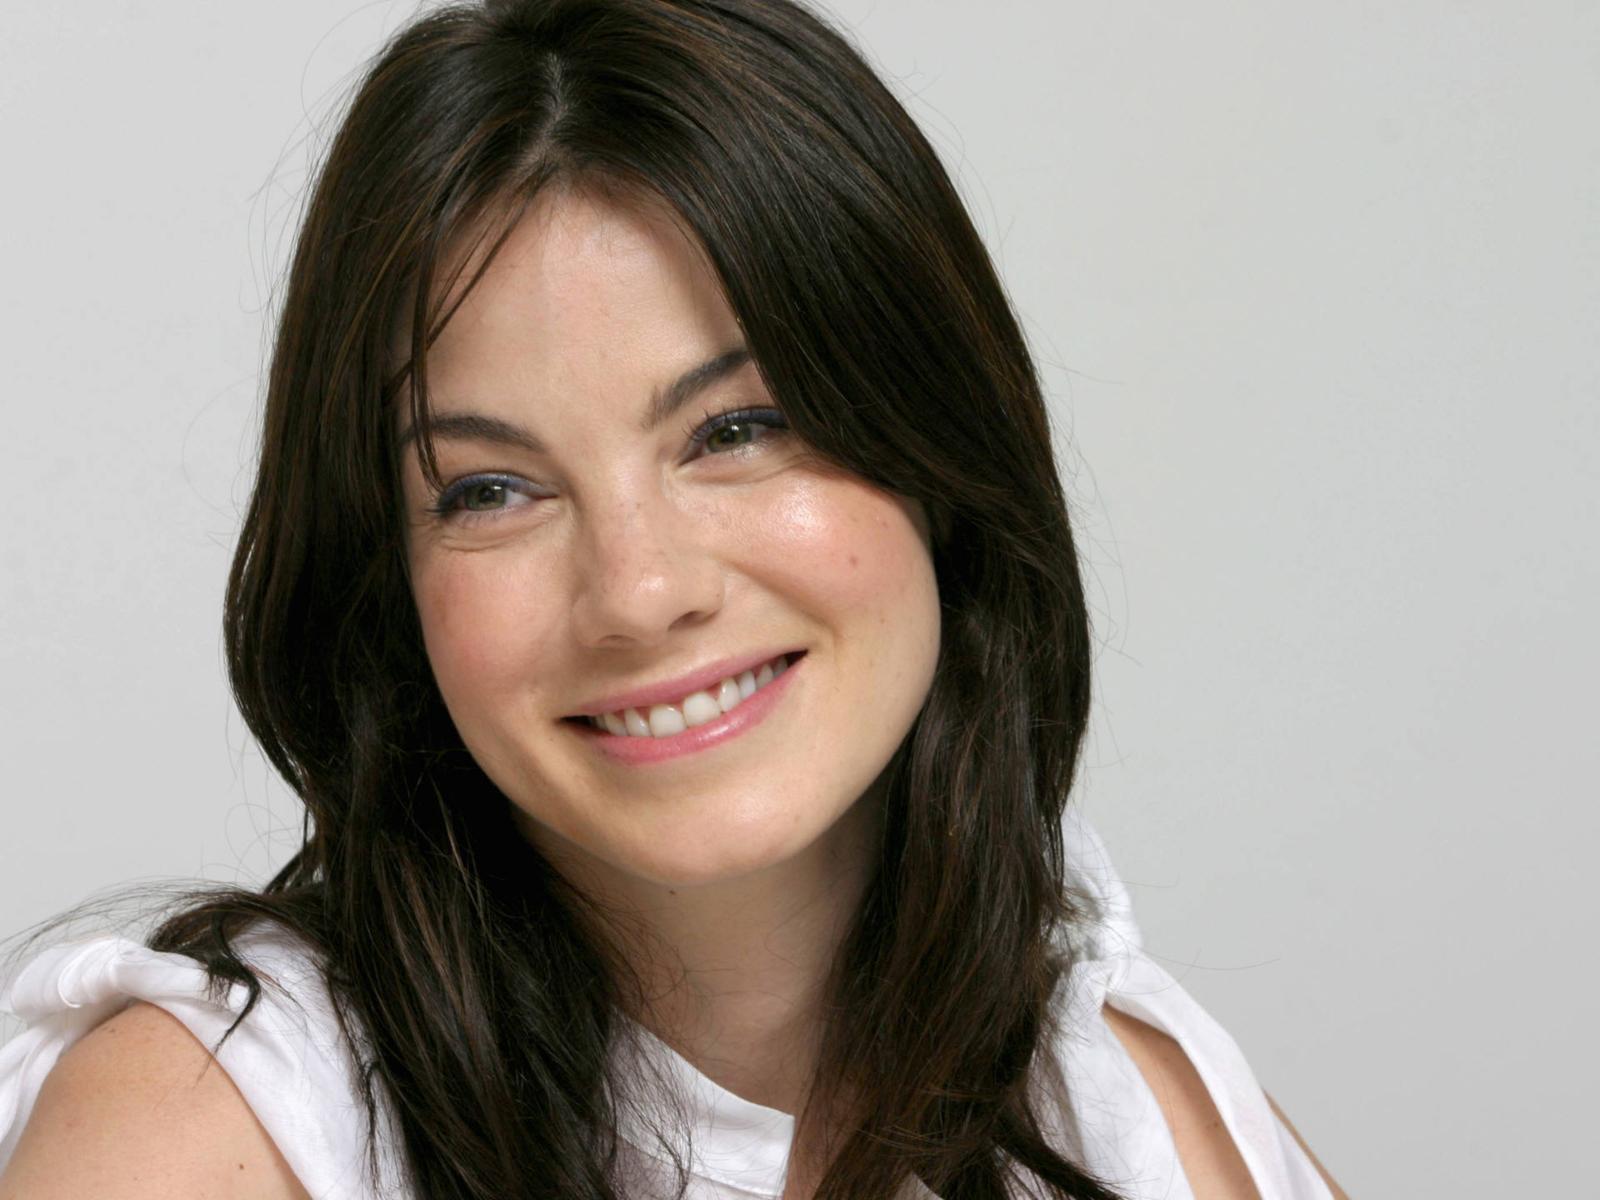 Michelle Monaghan. Celebrities lists